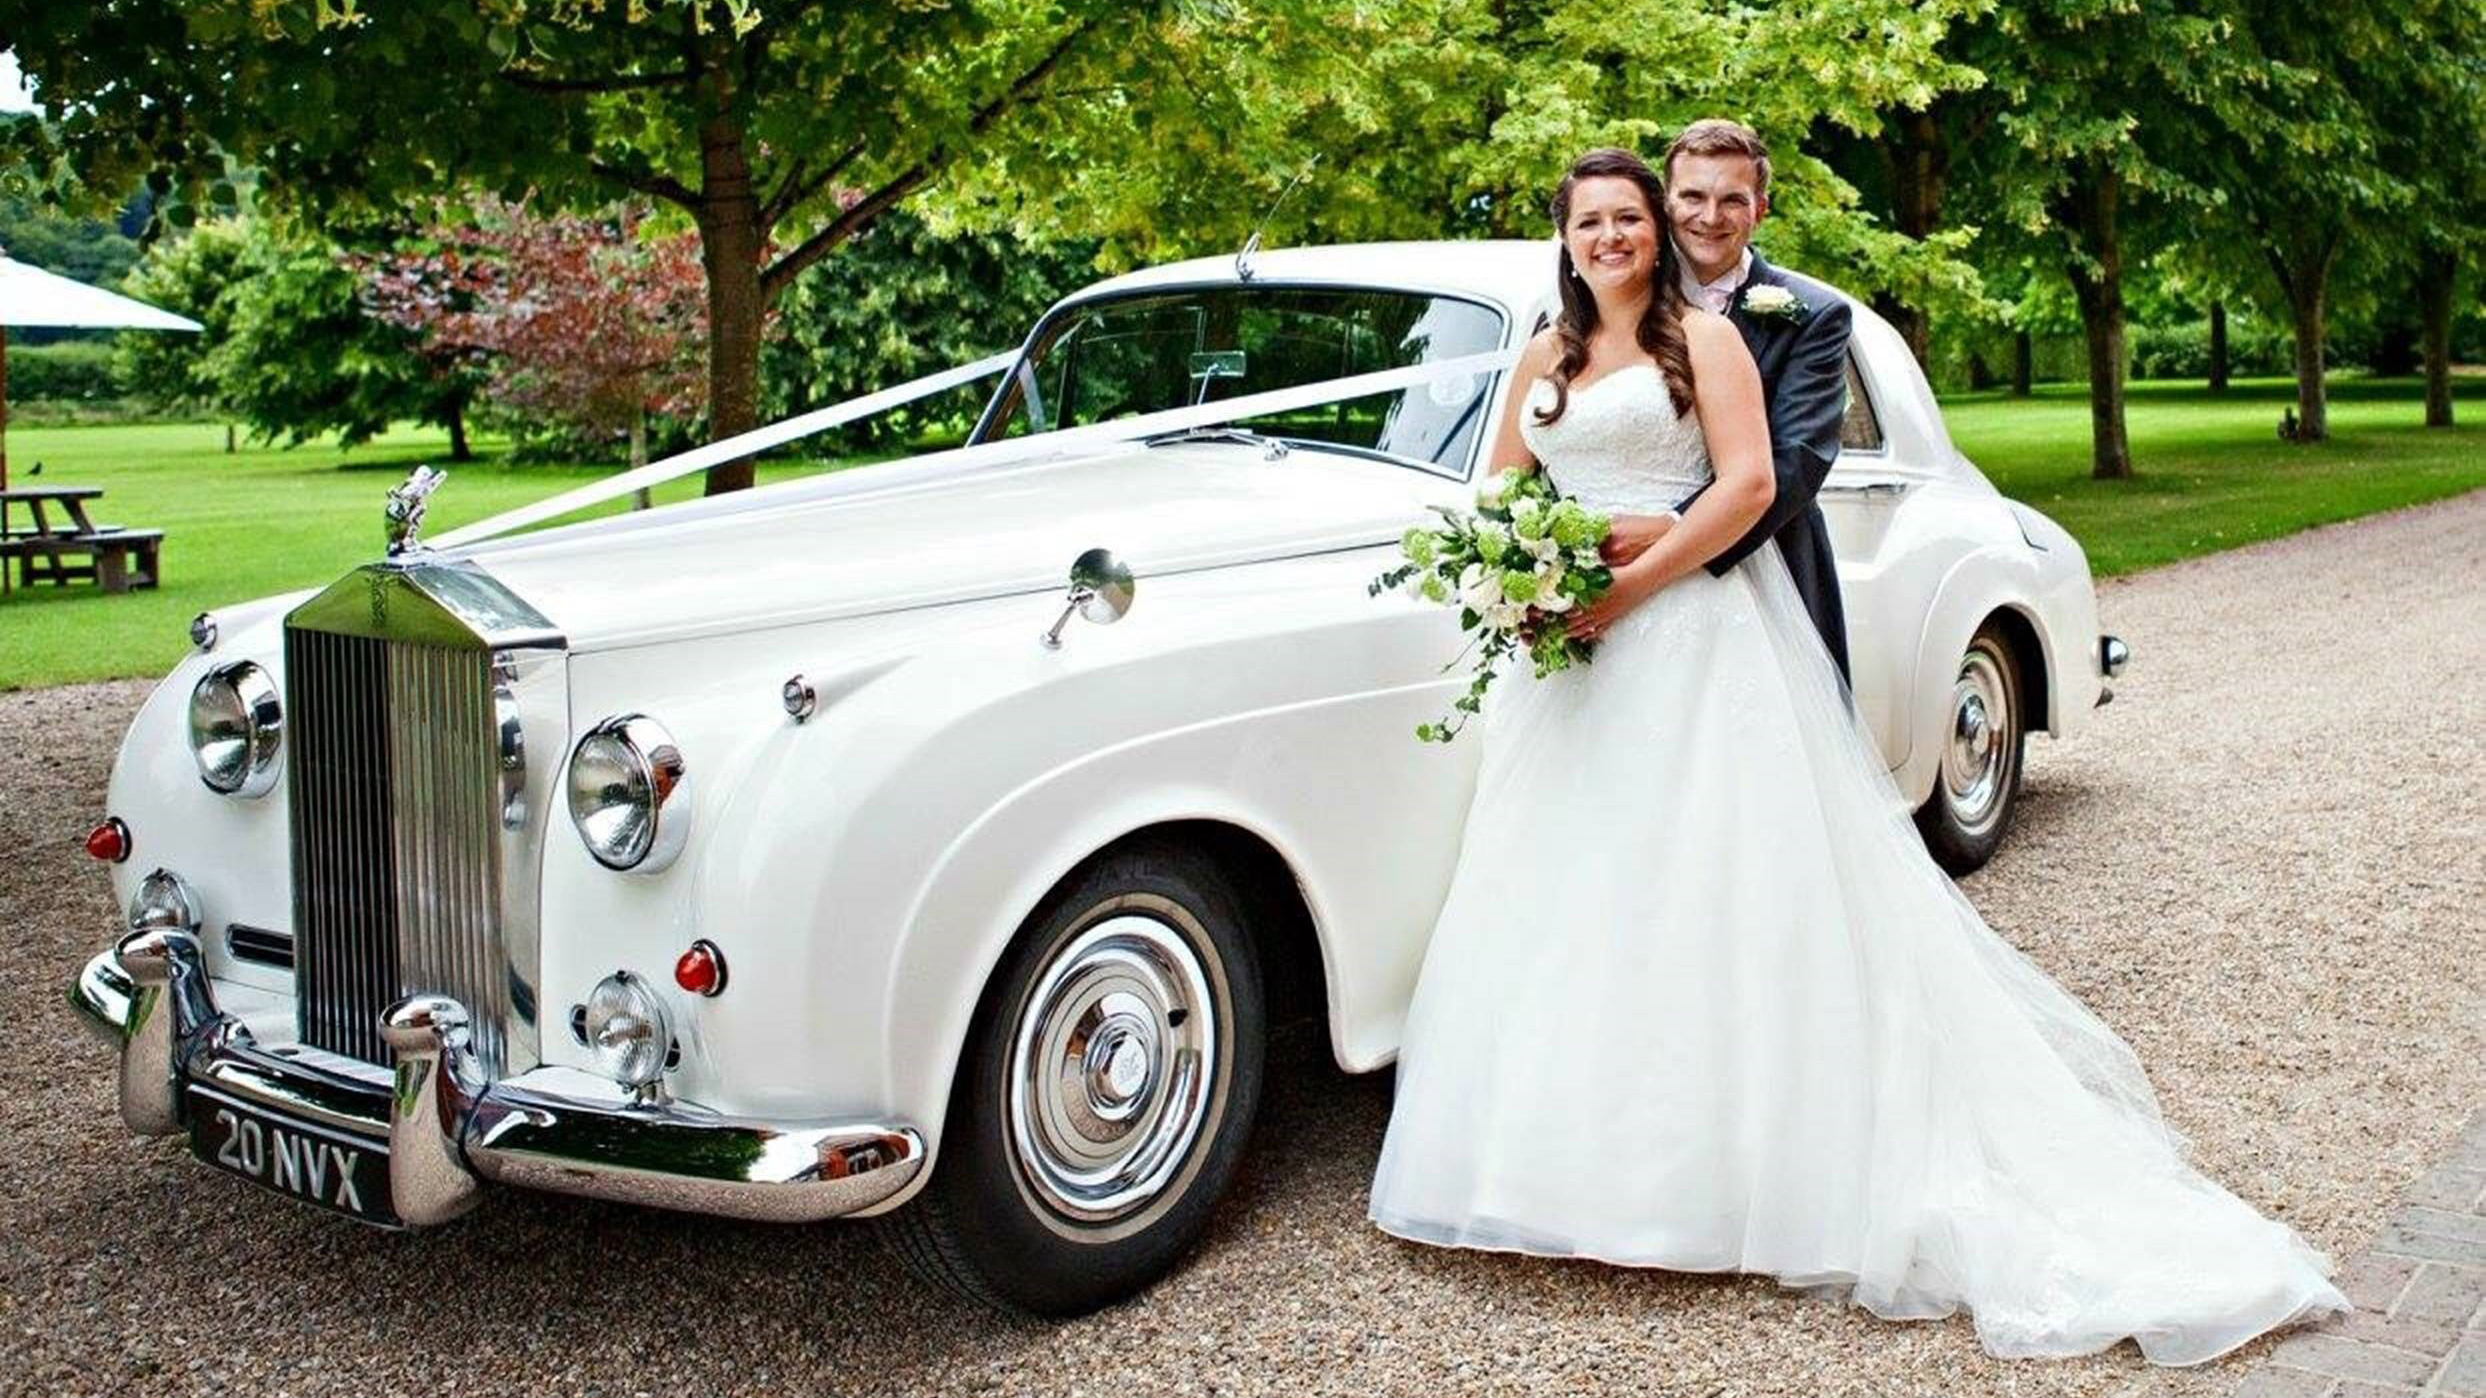 White Rolls-Royce Silver cloud decorated with ivory ribbons parked in the entrance of a wedding venue in Biggleswade. Bride and Groom are standing by the vehicle. Groom is holding his Bride in his arms while she holds her bridal bouquet.